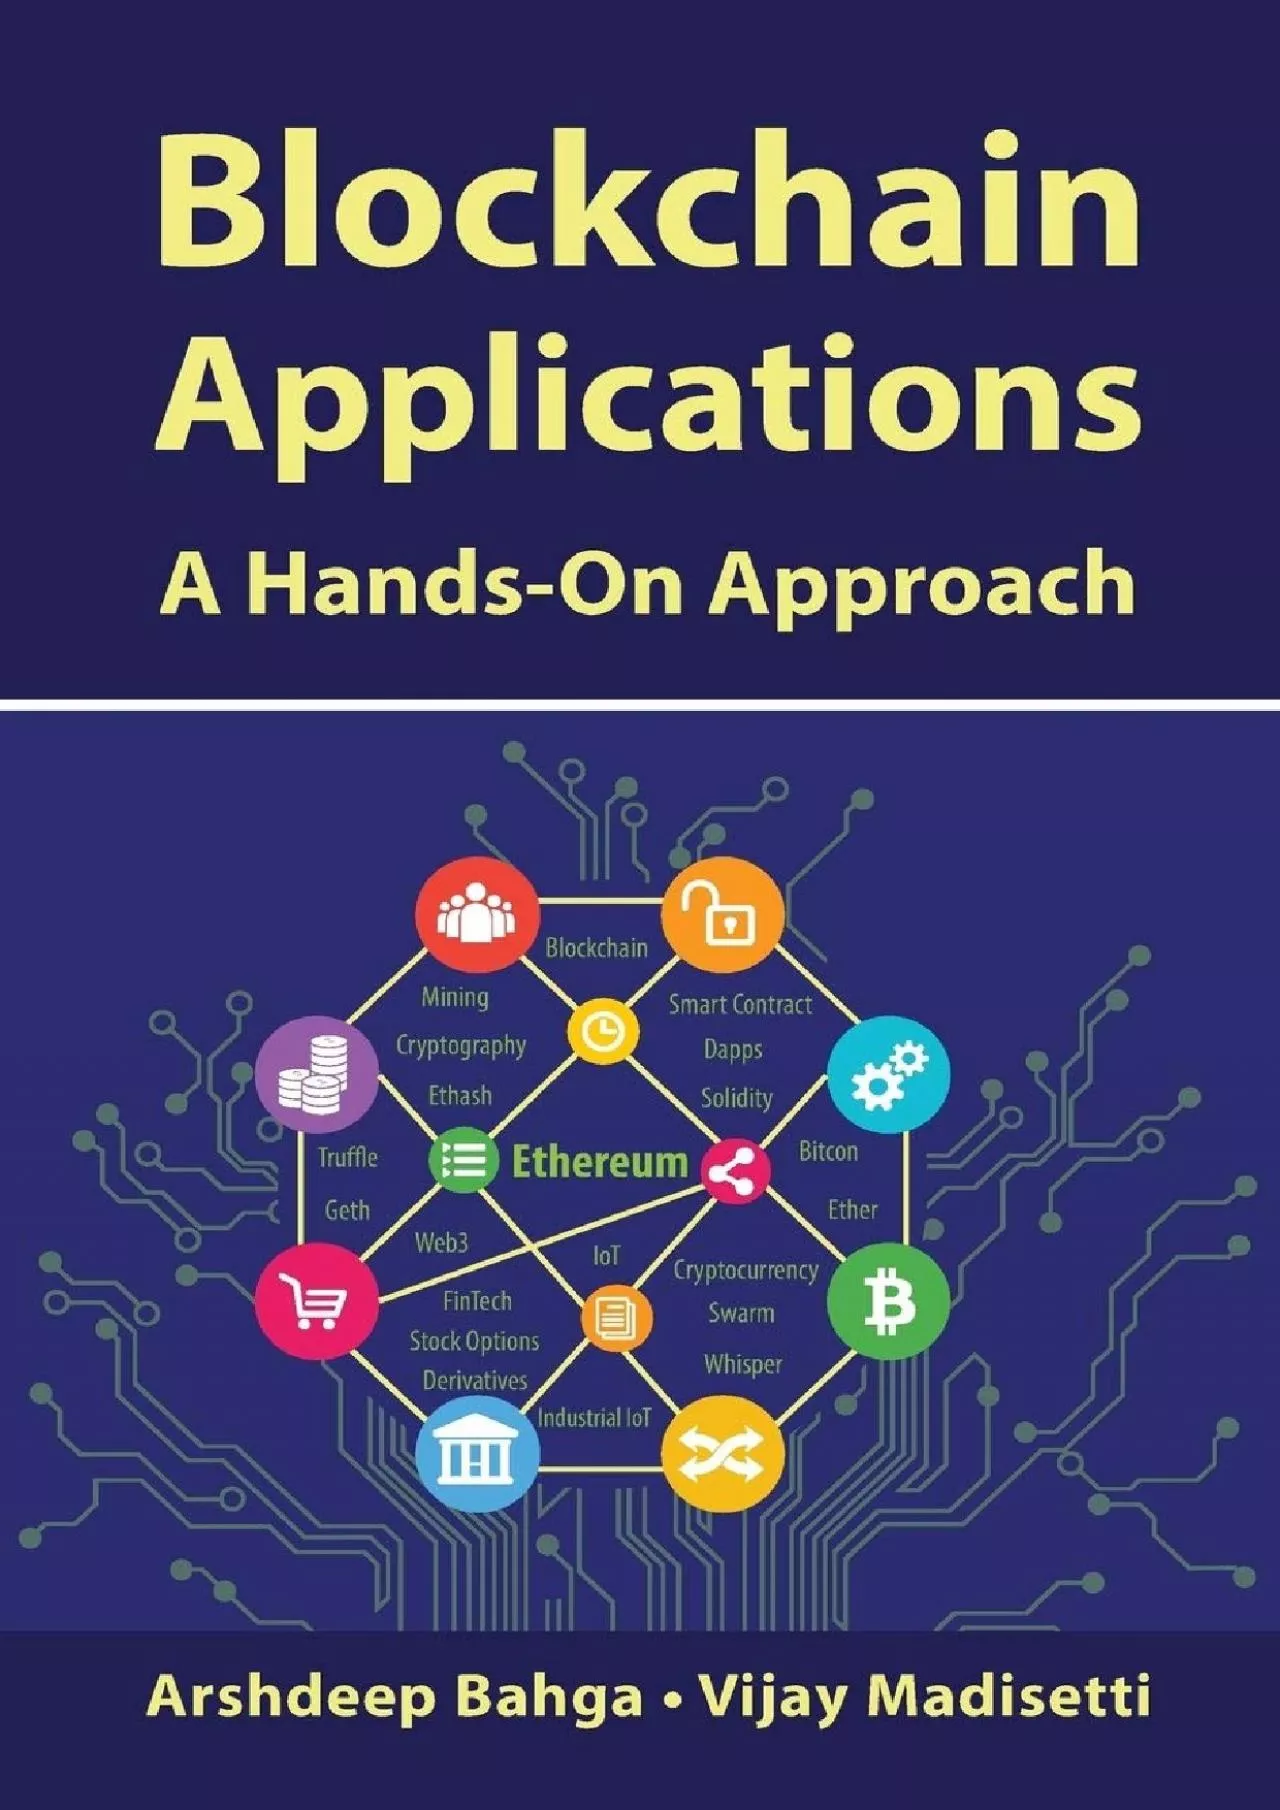 (DOWNLOAD)-Blockchain Applications: A Hands-On Approach